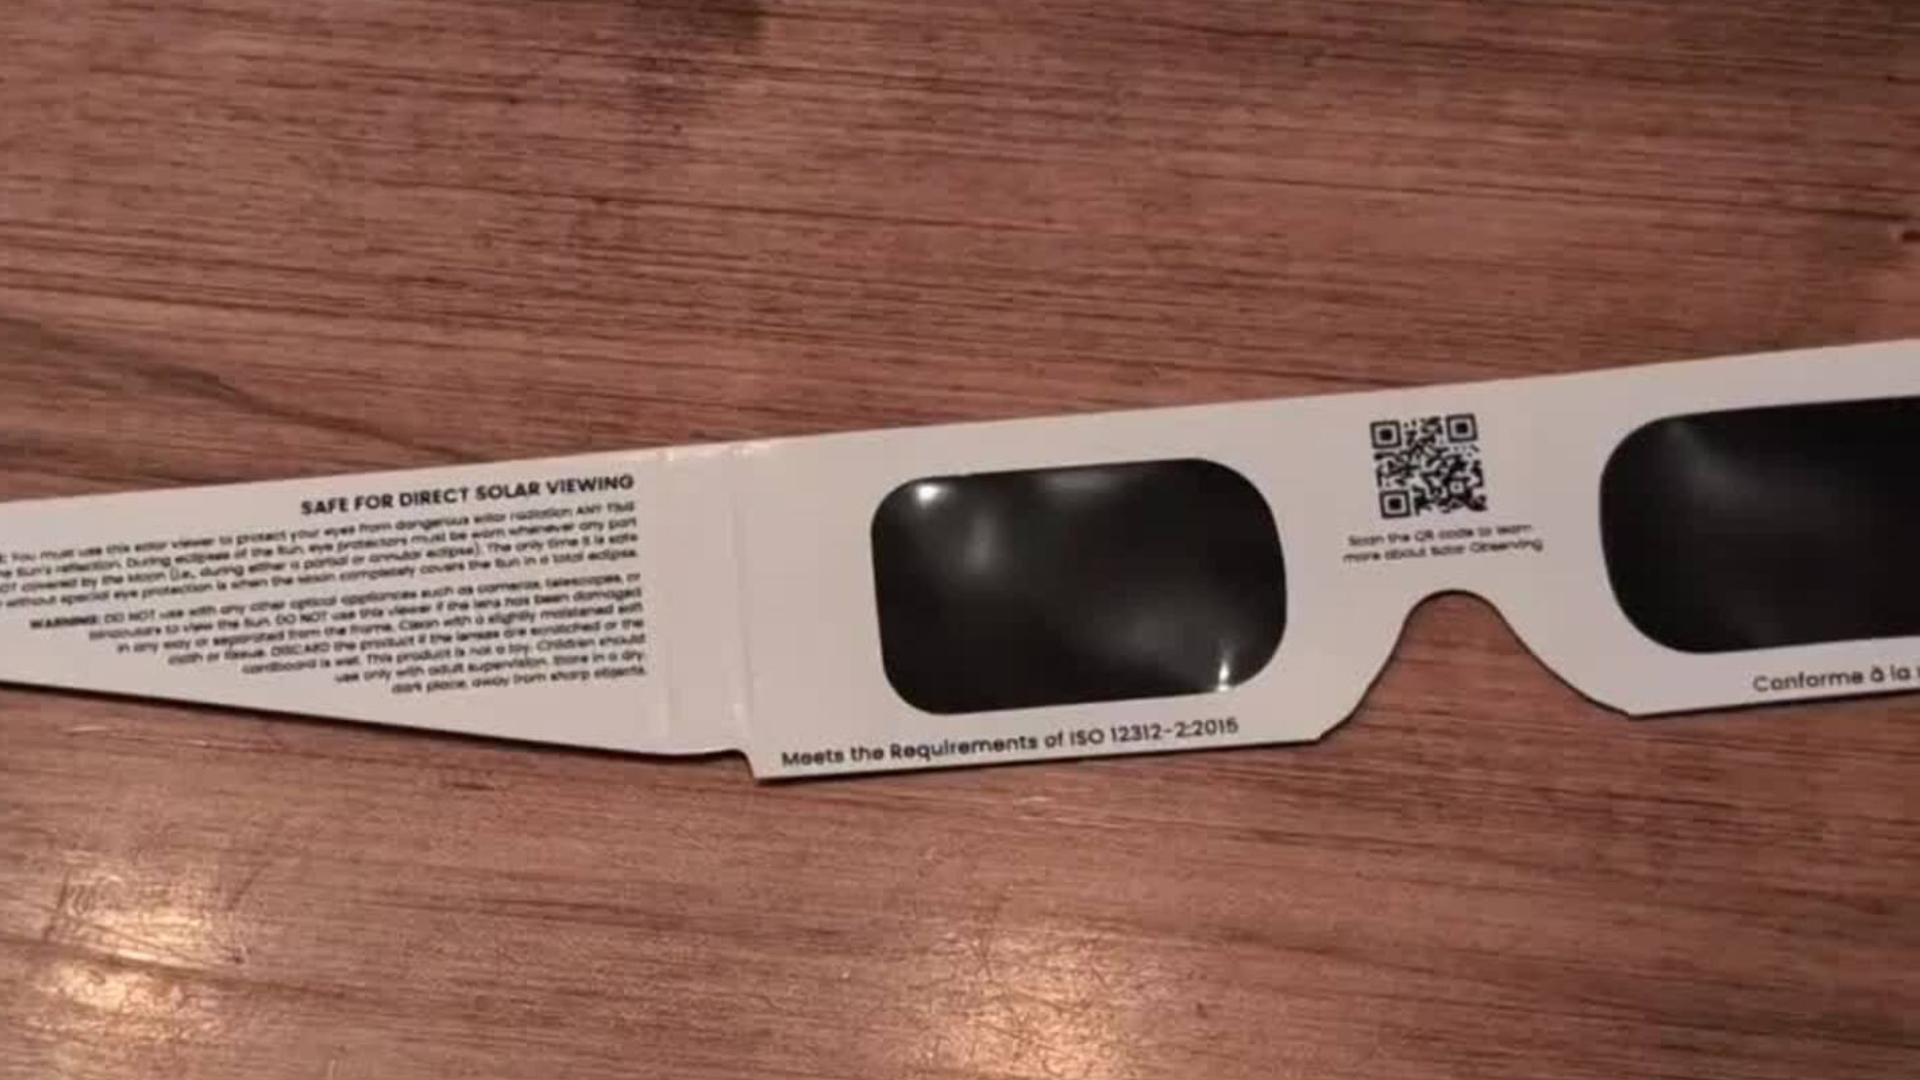 Counterfeit solar glasses popping up